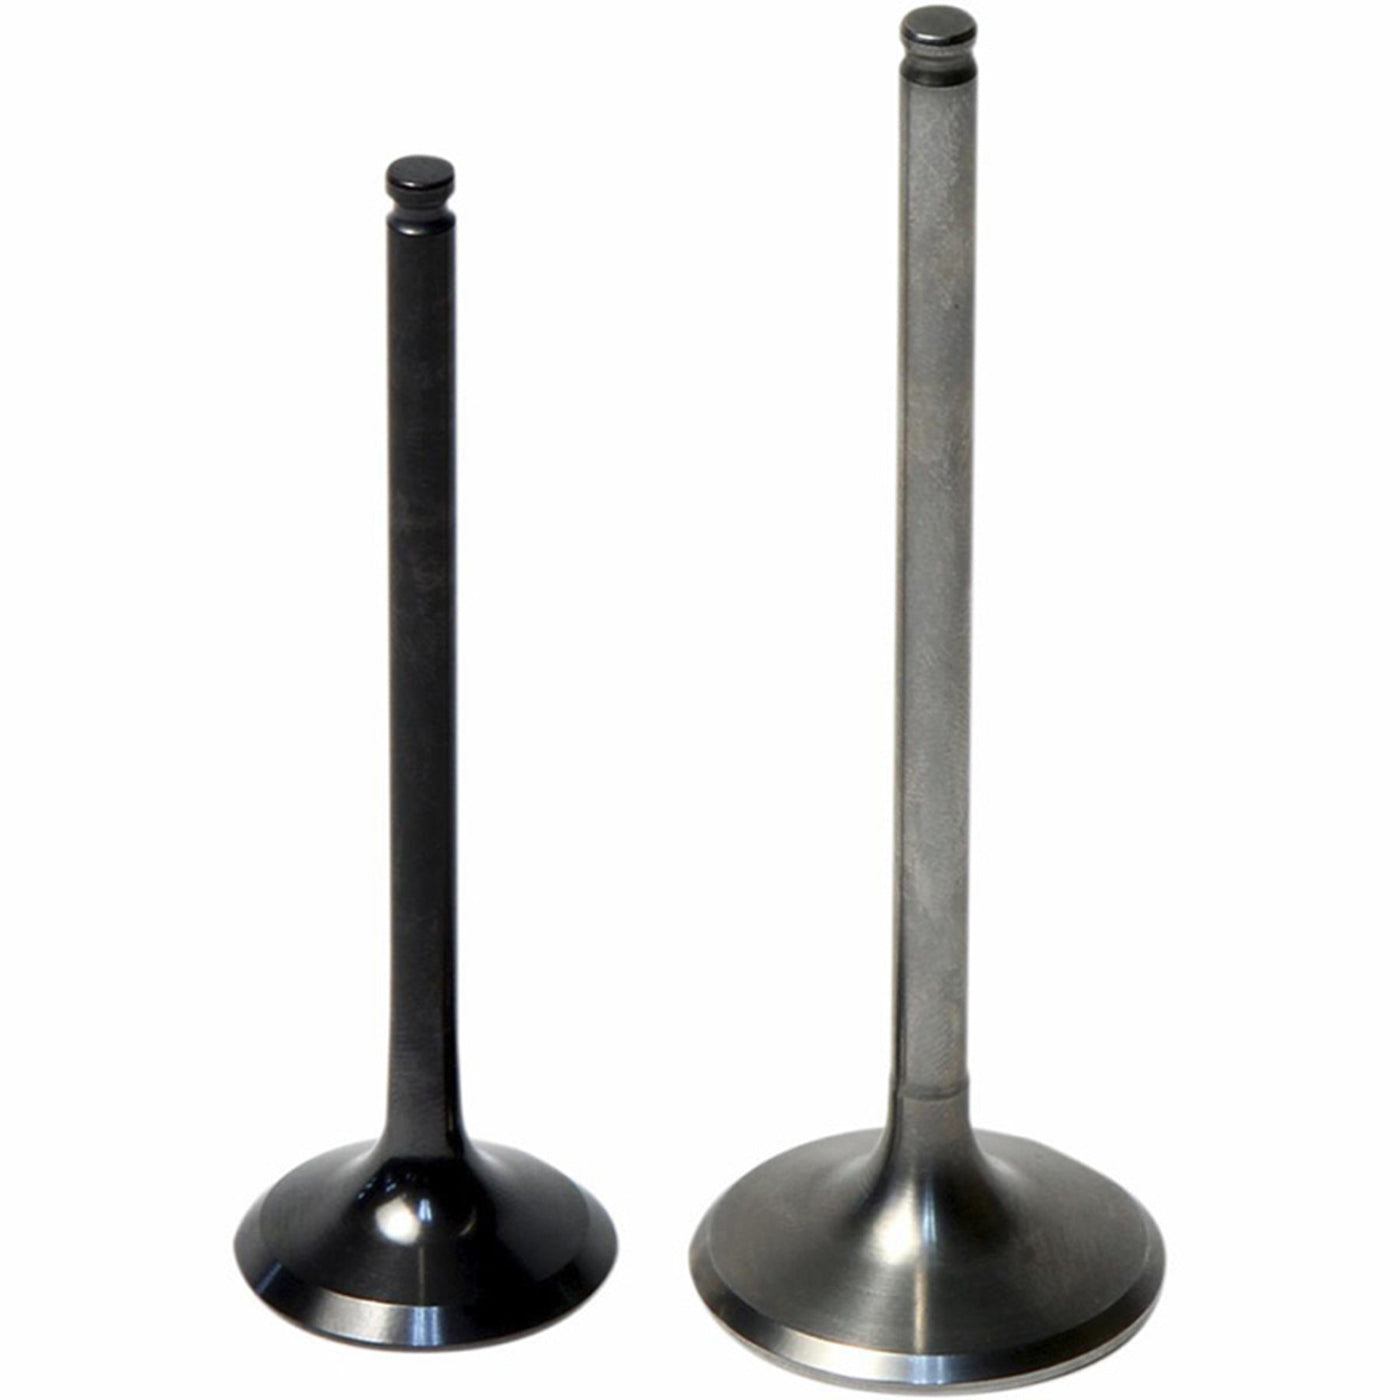 Hotcams 8400005-1 Intake and Exhaust Valves #8400005-1